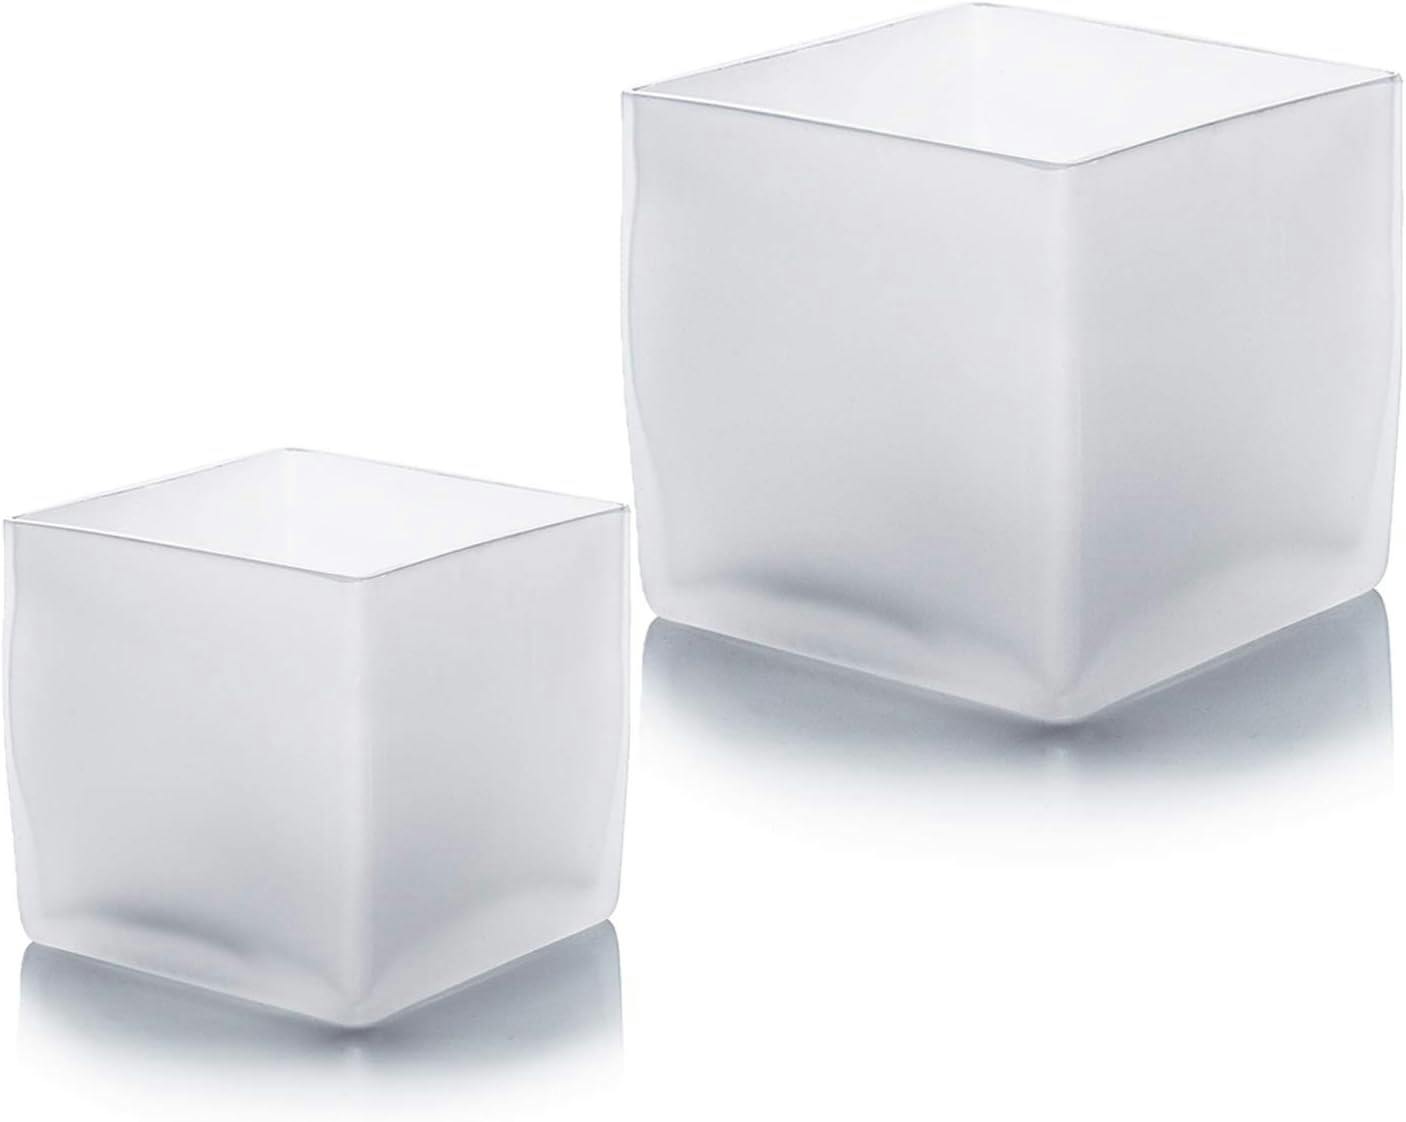 Elegant Frosted Glass Cube Vase 5"x5"x5" for Sophisticated Decor